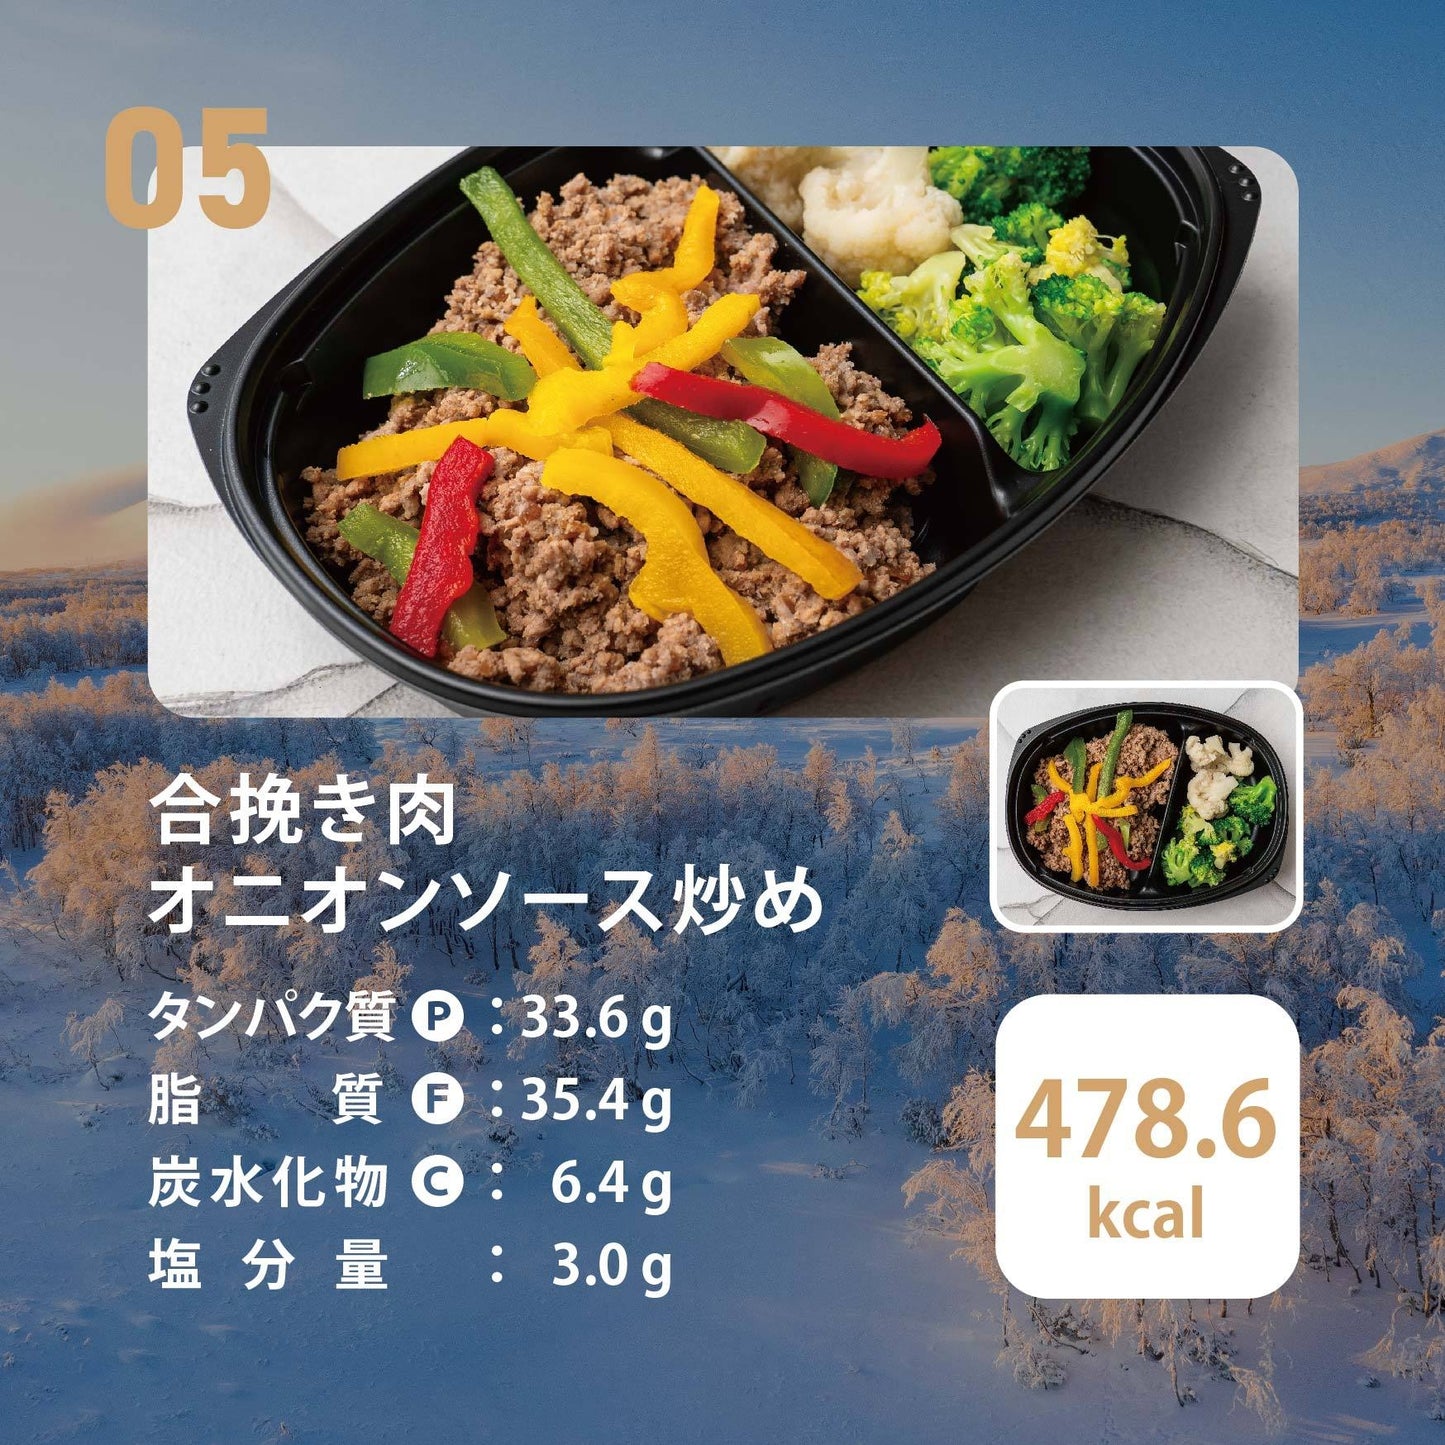 #2 LOWCARB 7食セット